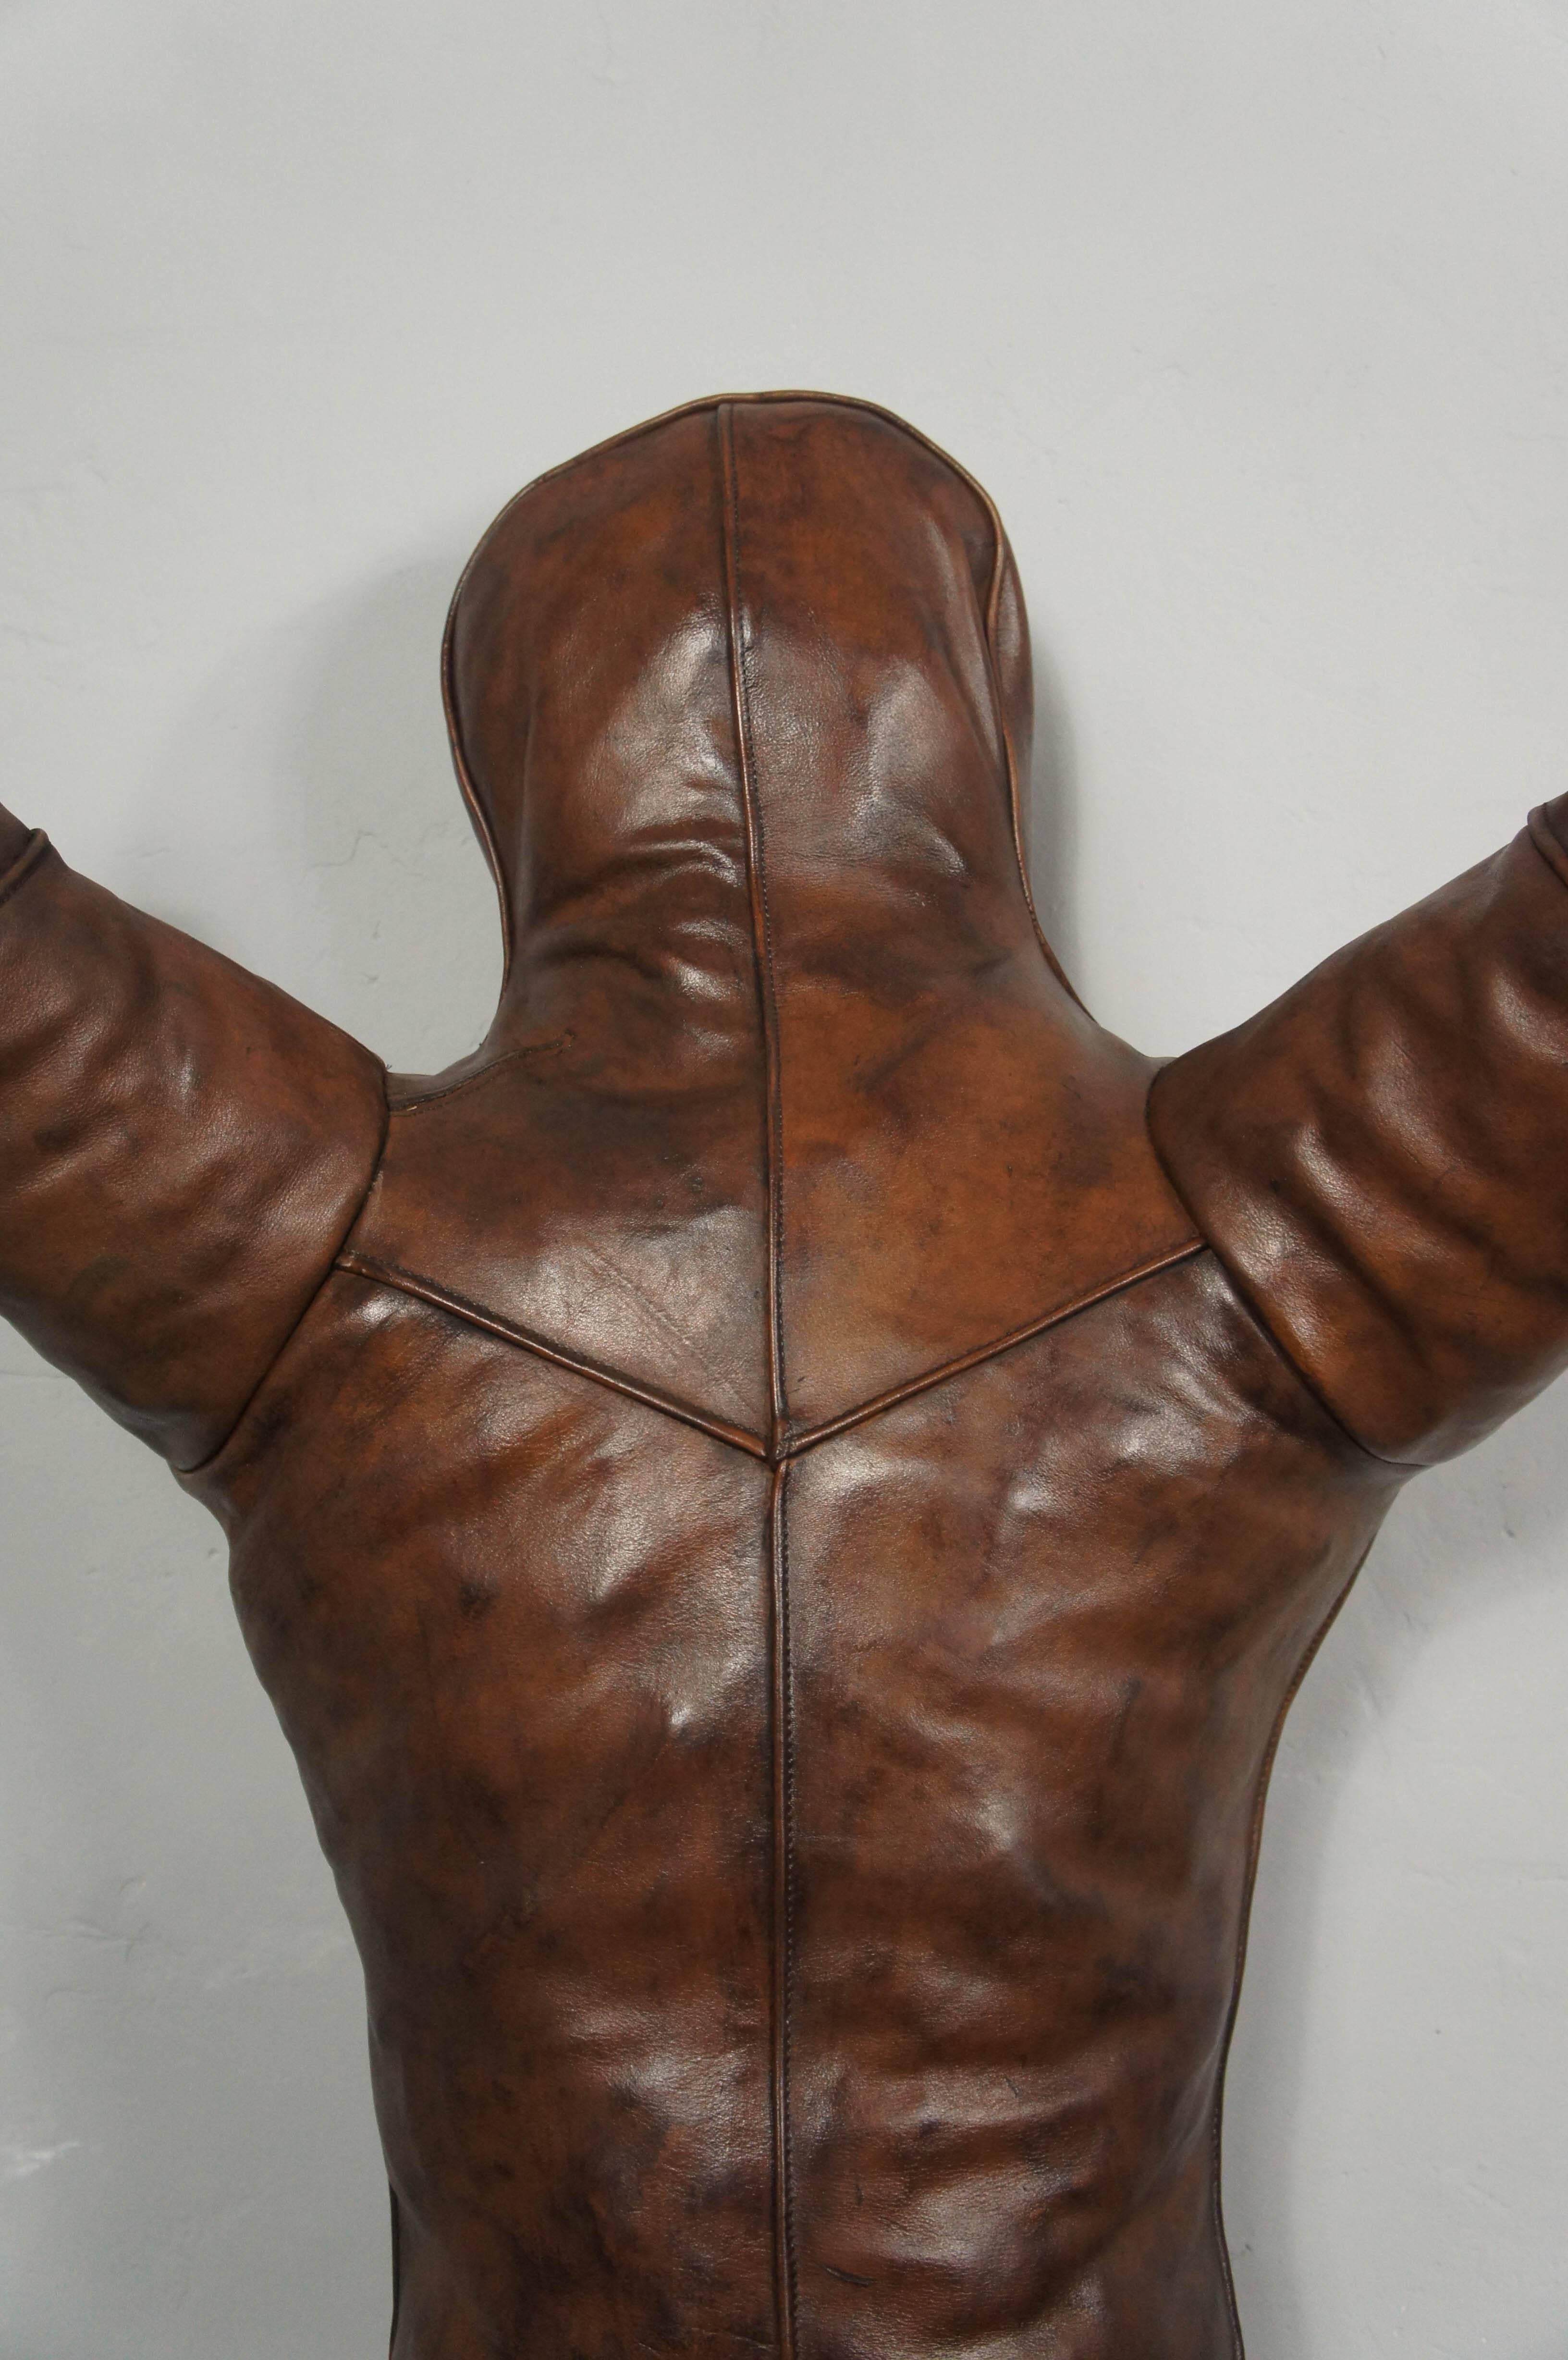 boxing mannequin for sale